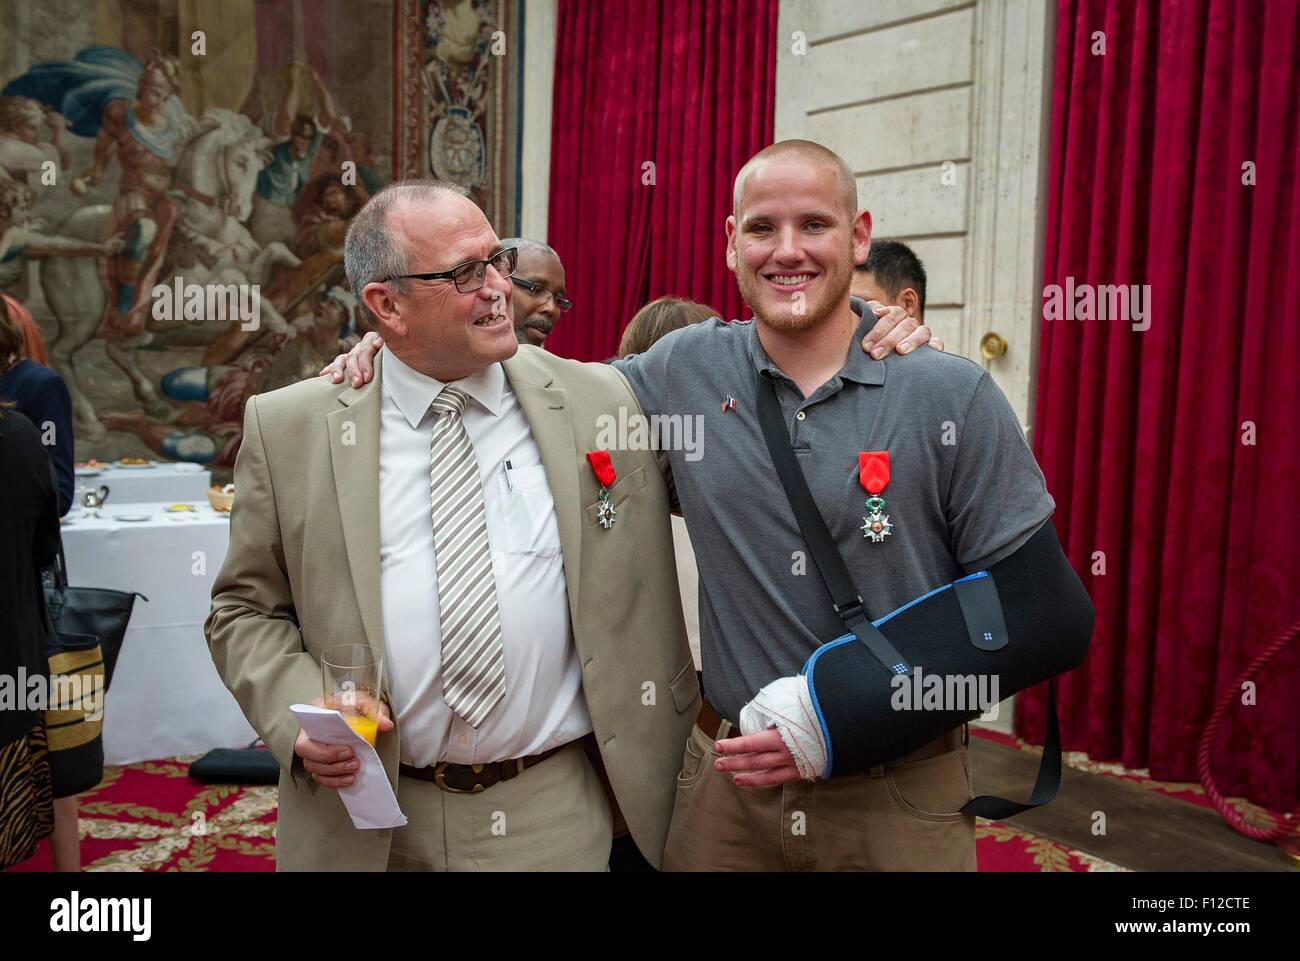 Paris, France. 24th Aug, 2015. U.S. Air Force Airman 1st Class Spencer Stone, right,  with British businessman Chris Norman after they were awarded the Legion of Honor in a ceremony at the Elysée Palace August 24, 2015 in Paris, France. Stone with friends, Aleksander Skarlatos and Anthony Sadler, joined Norman in subduing a terror attack by a gunman on the high-speed Thalys train service. Stock Photo